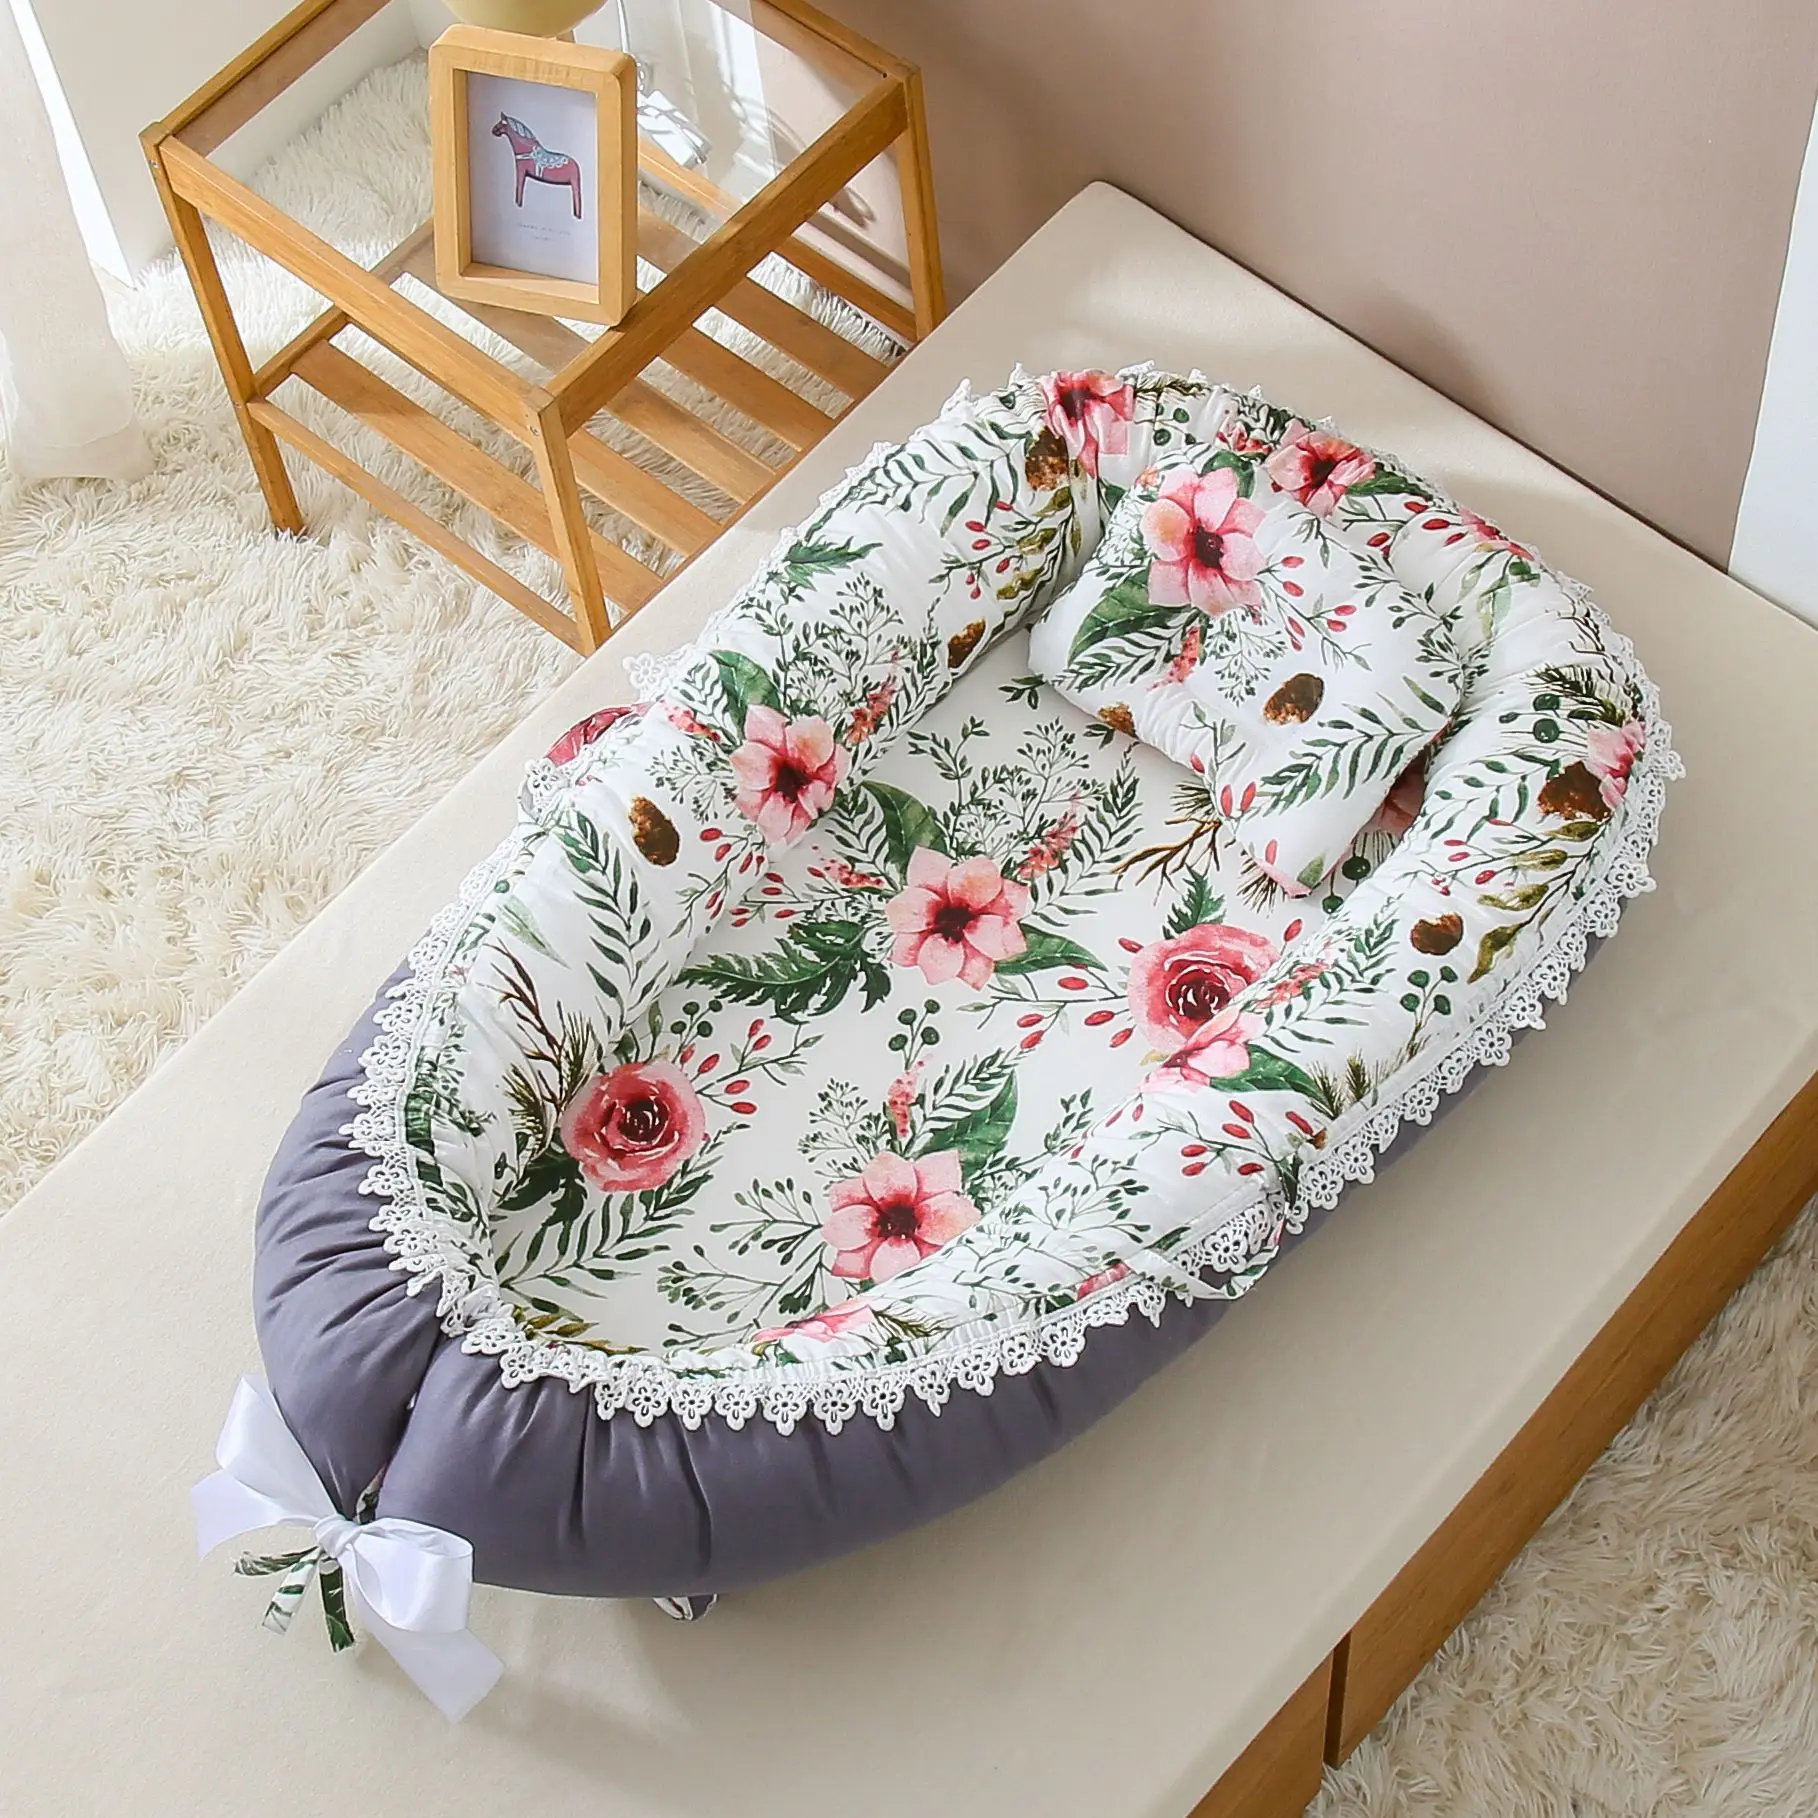 Cotton Co-Sleeping Baby Bed with Pillow Portable 0-12 Months Newborn Lounger Breathable Sleeper Nest Play Mat Infant Floor Seat